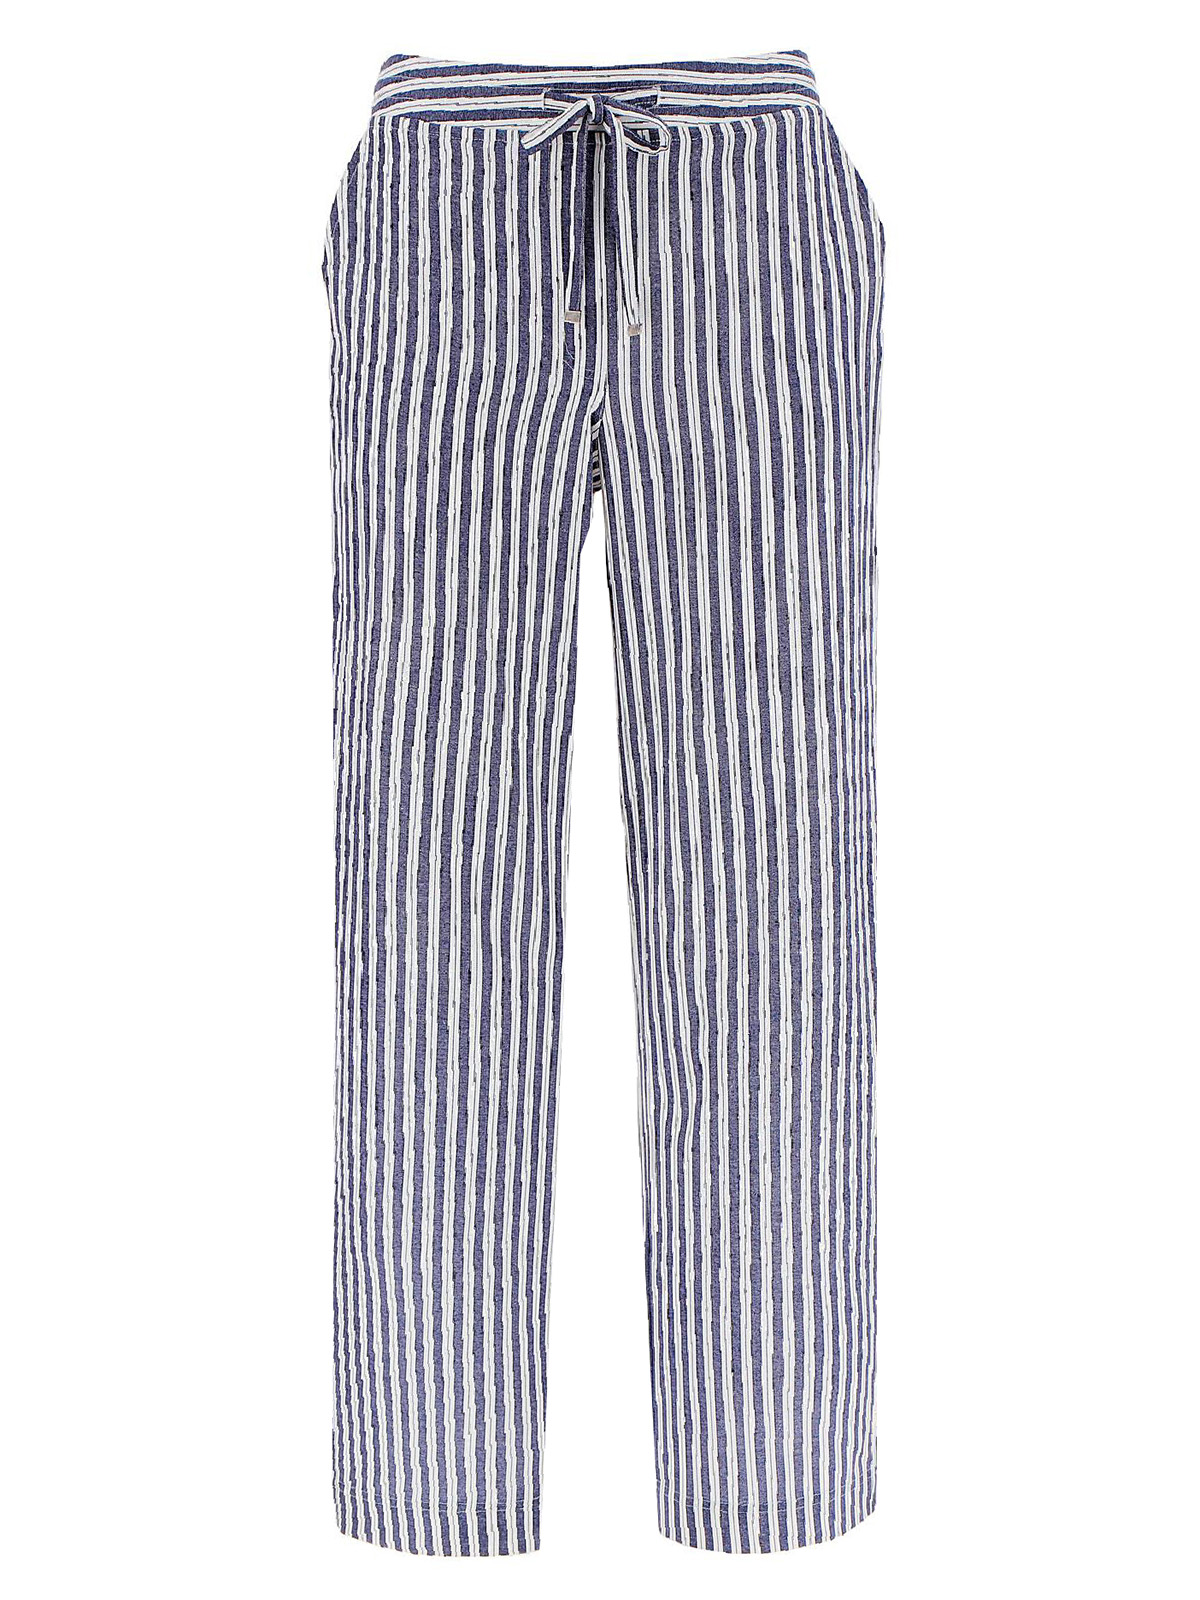 Capsule - - Capsule BLUE/WHITE Linen Blend Striped Easy Care Trousers ...